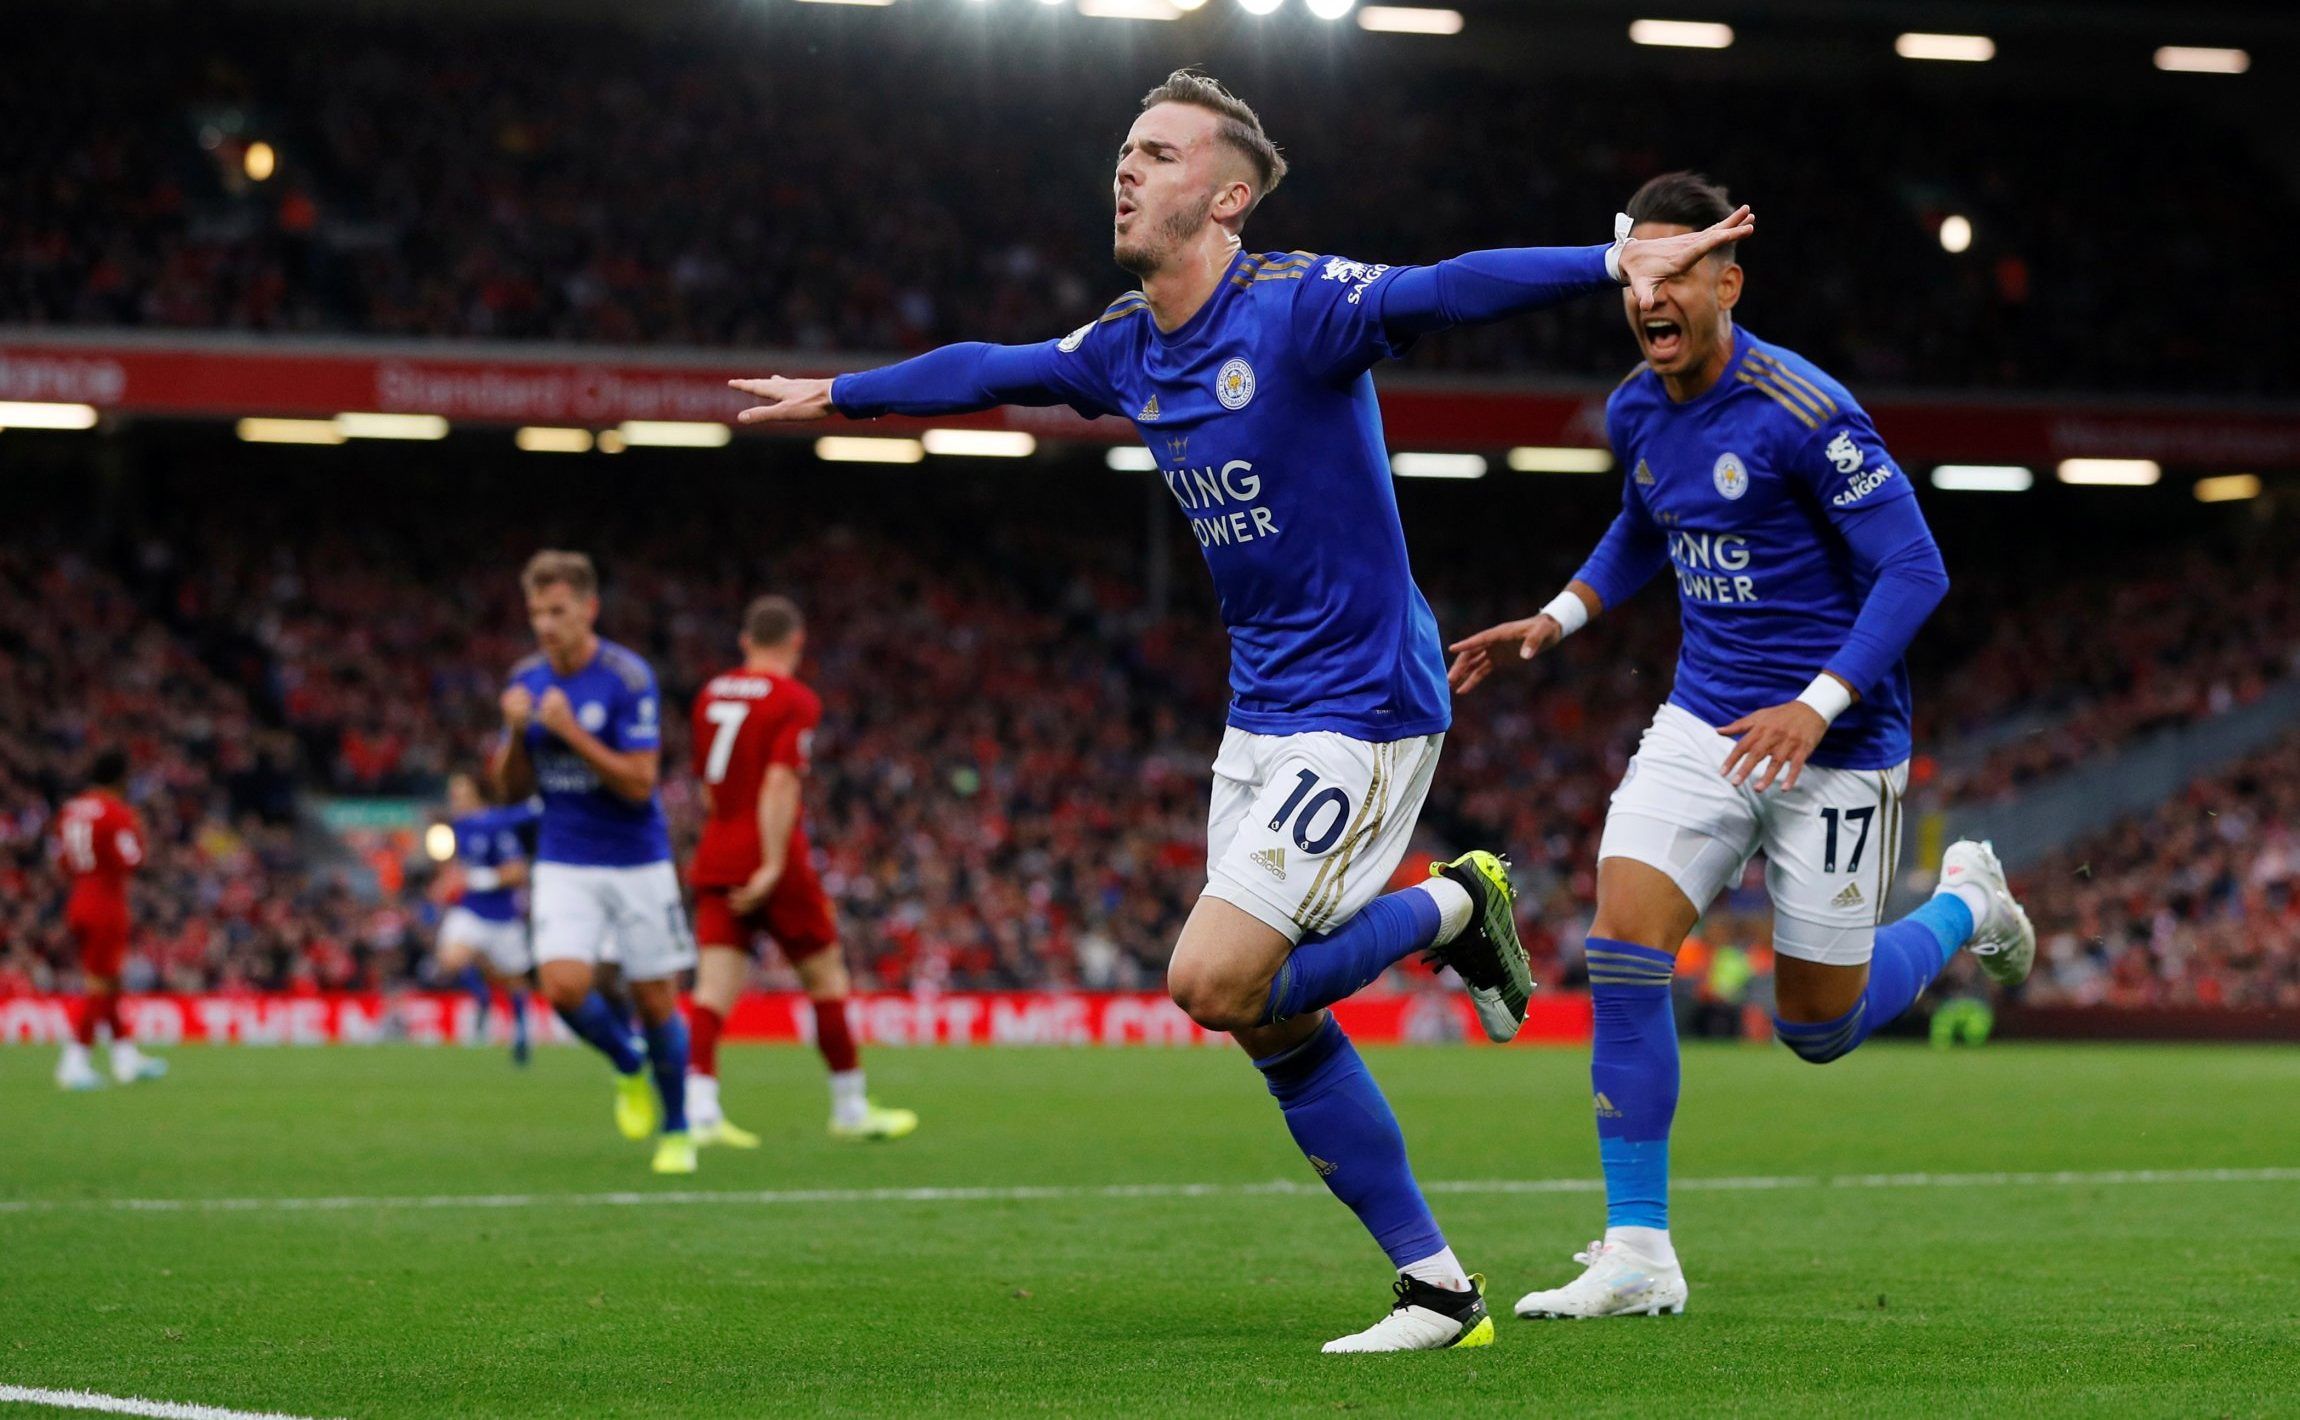 leicester city midfielder james maddison celebrates scoring against liverpool in the premier league